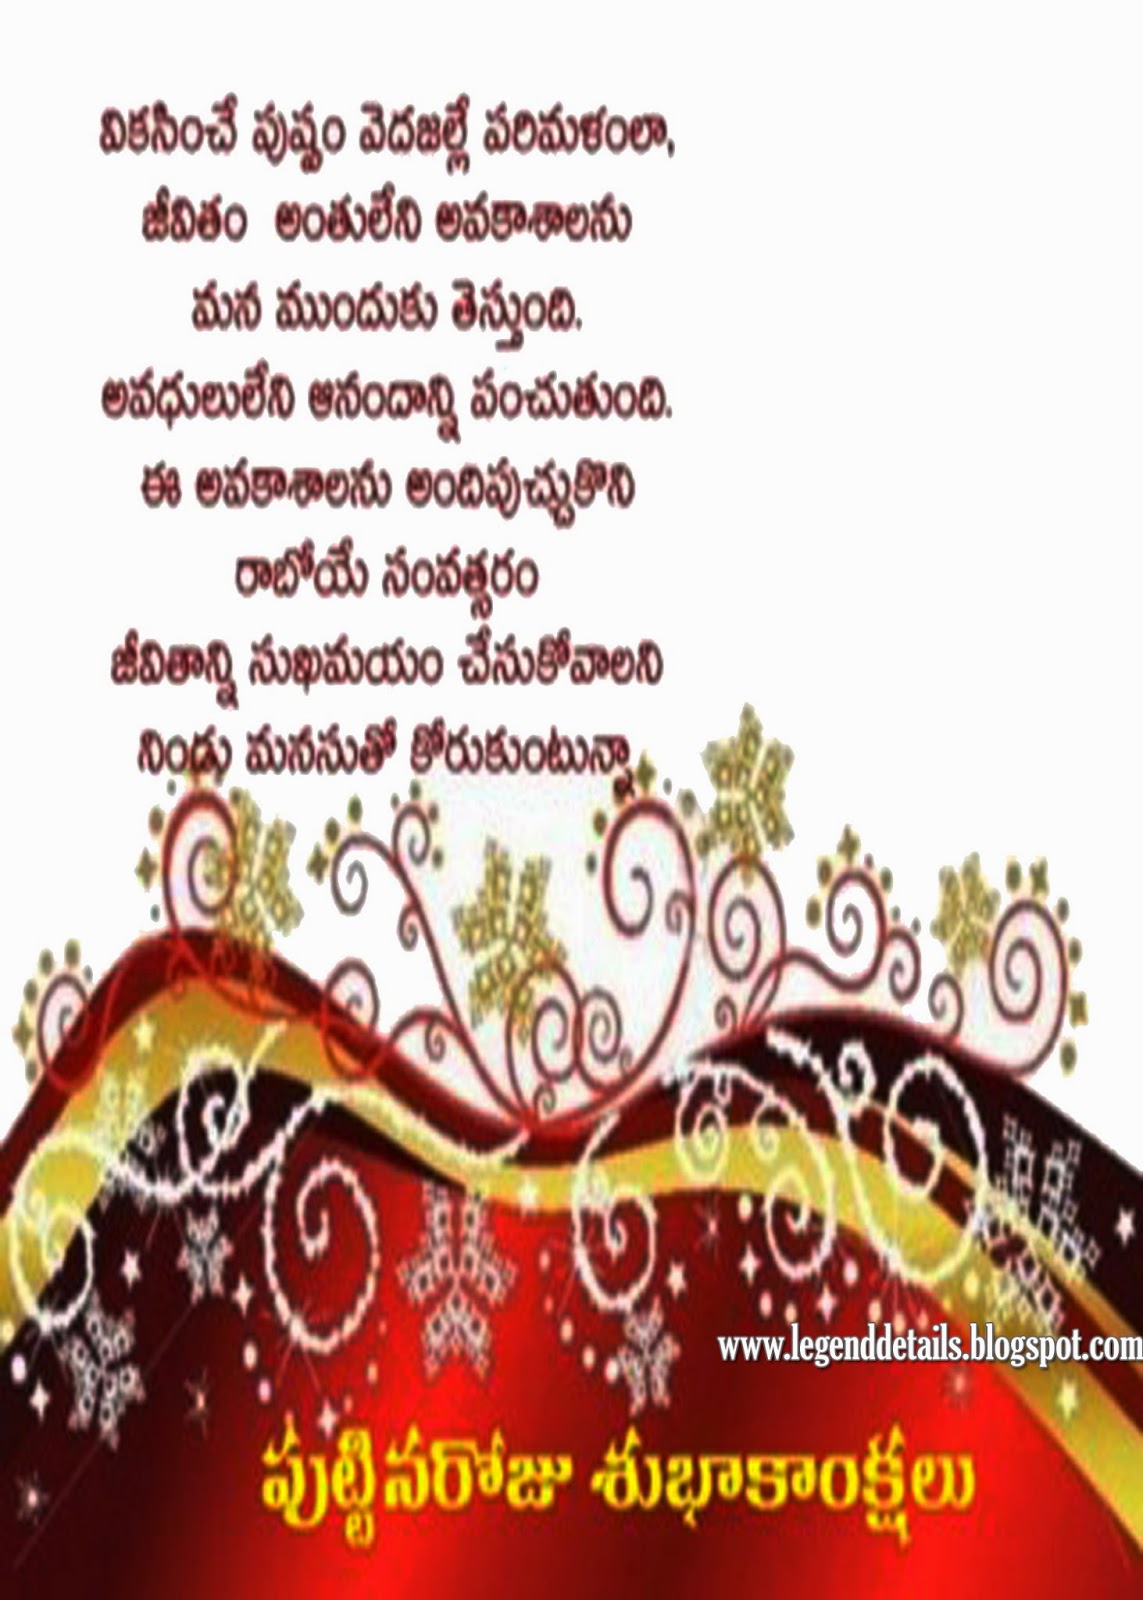 Birth Day Greetings for Sister In Telugu